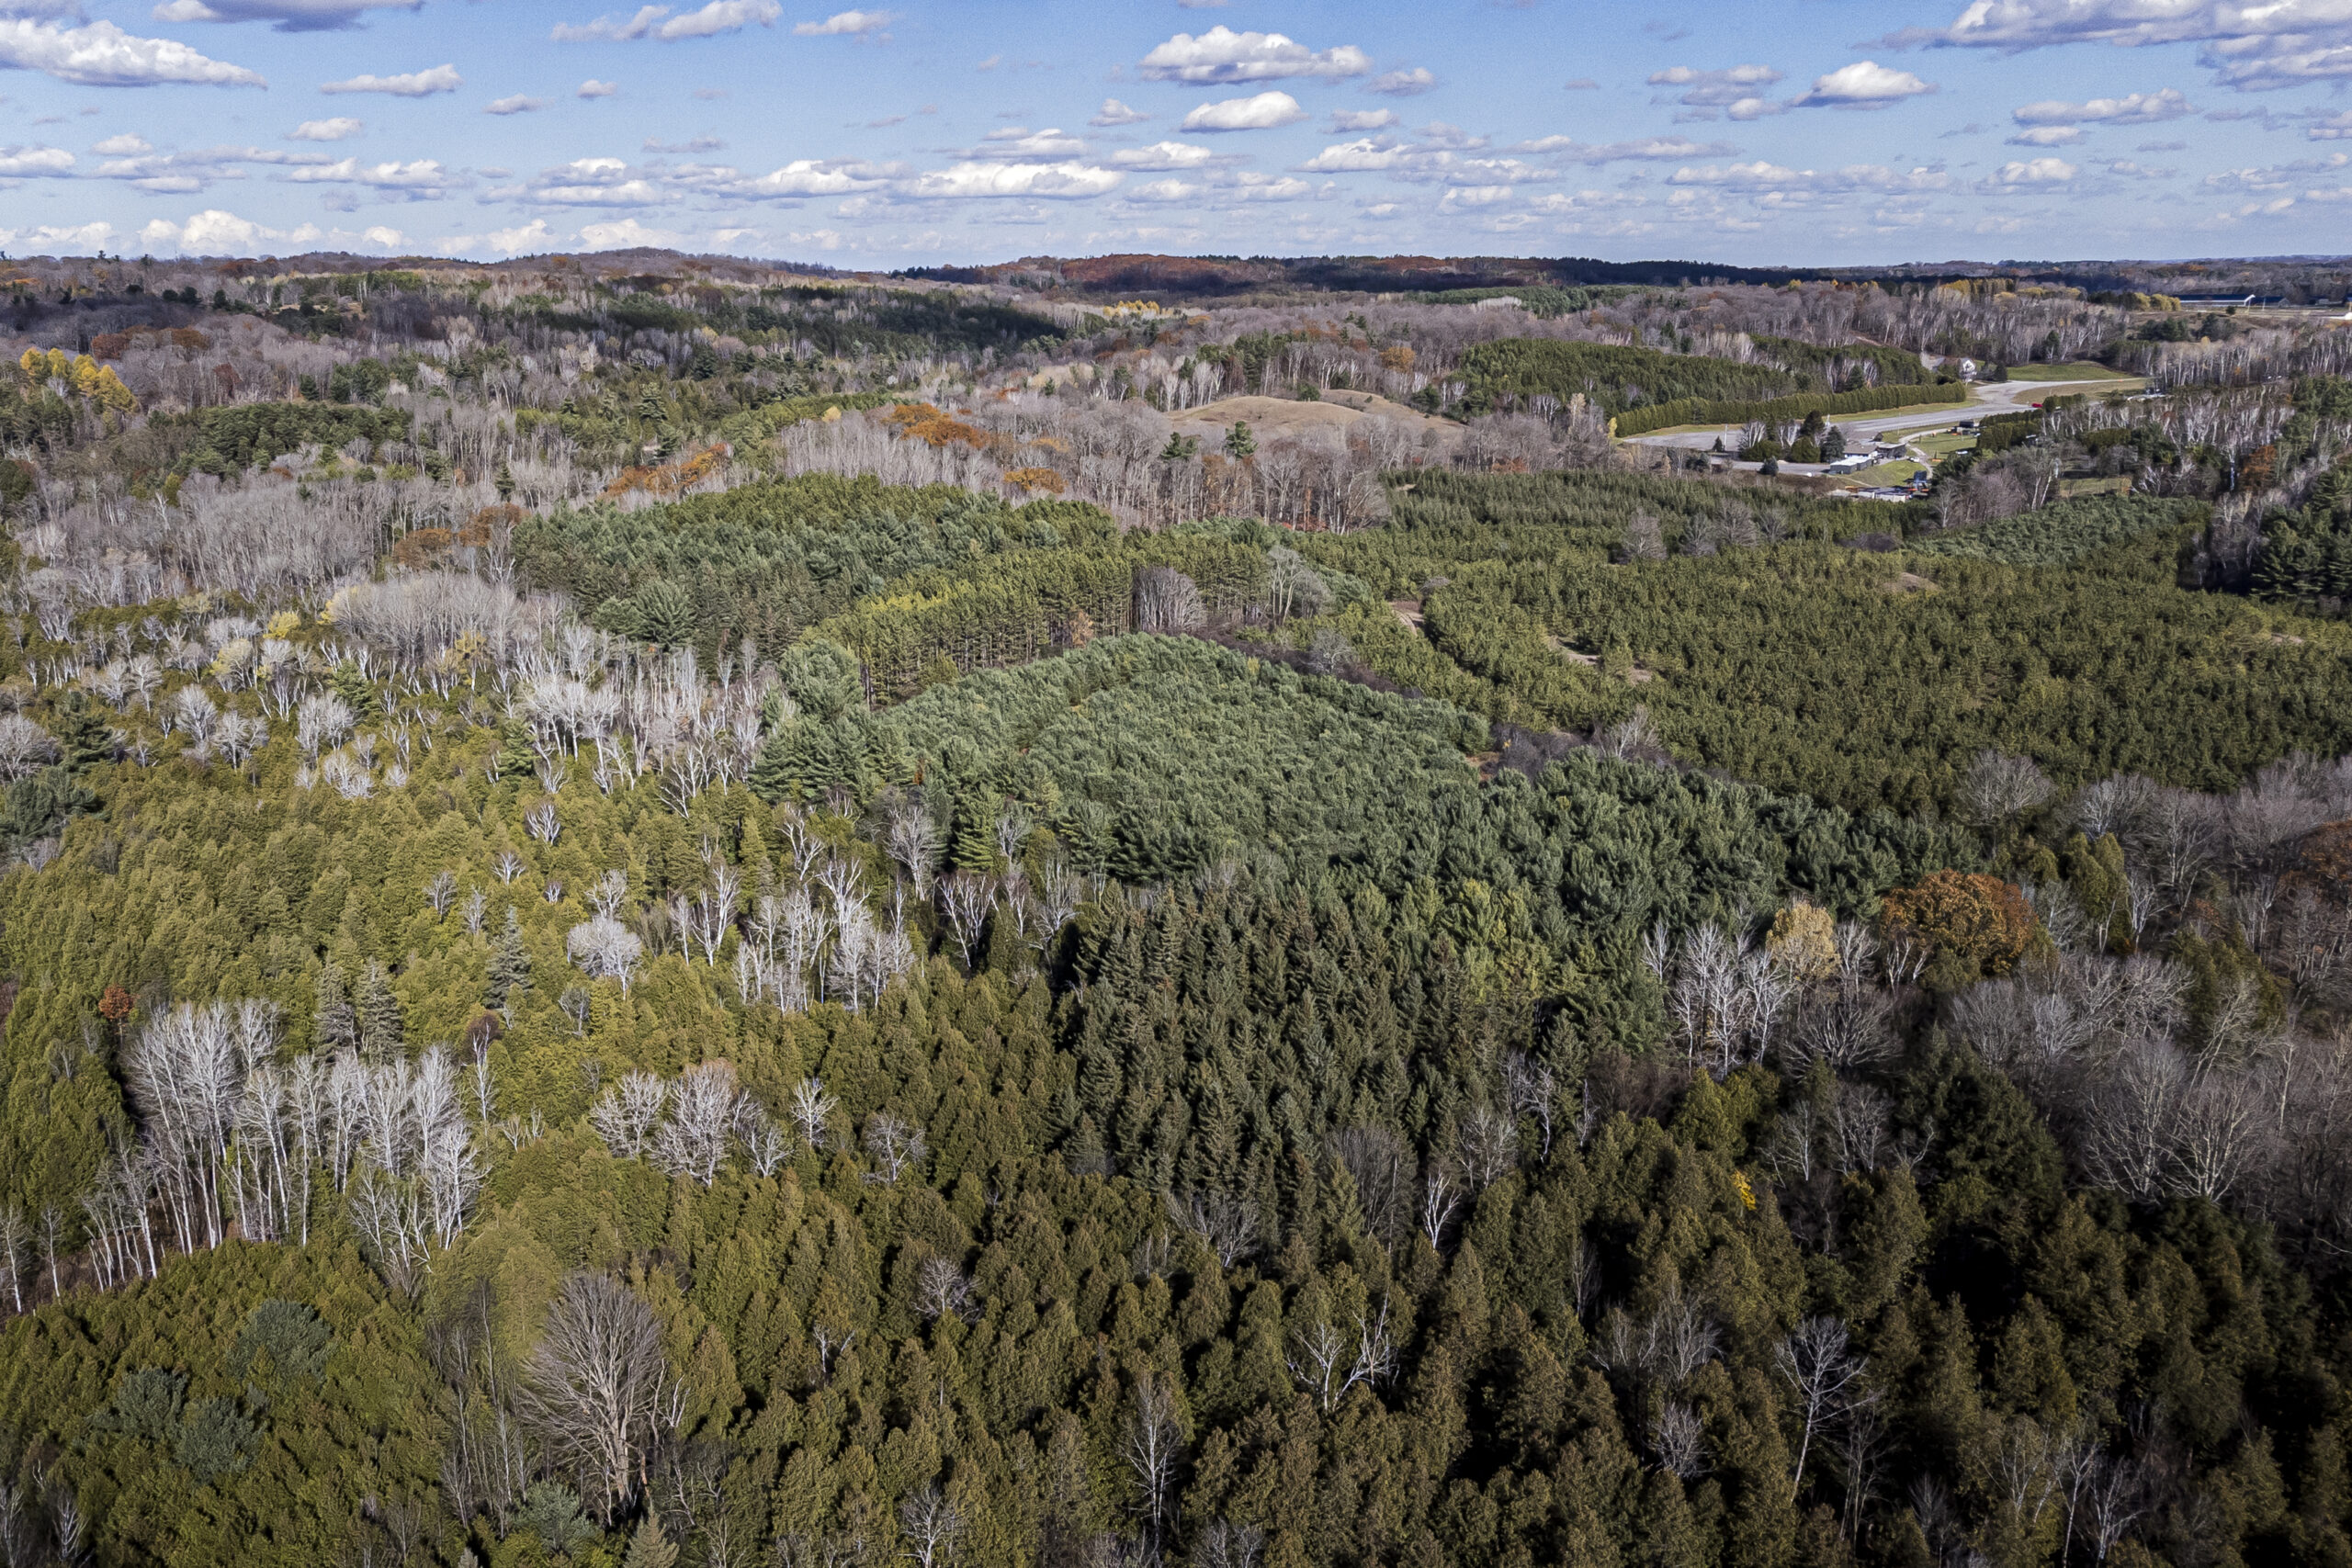 Photo of a forested area in Ontario's Greenbelt along the Oak Ridges Moraine